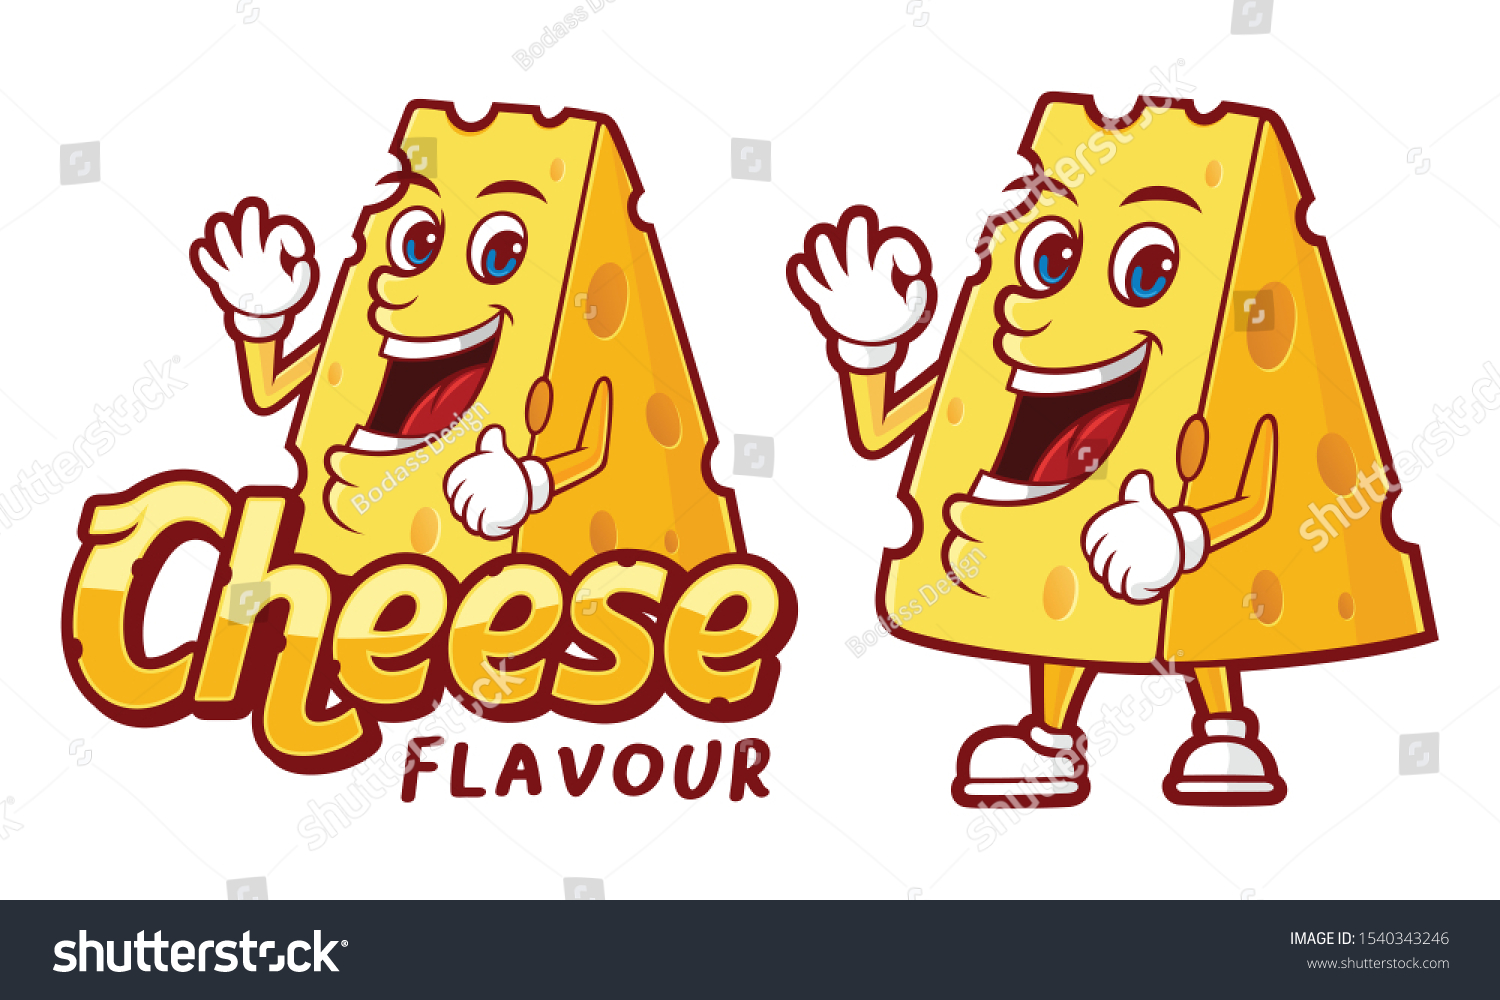 SVG of Cheese Flavour, with funny cheese character, for information and illustration of taste of various types of food products svg